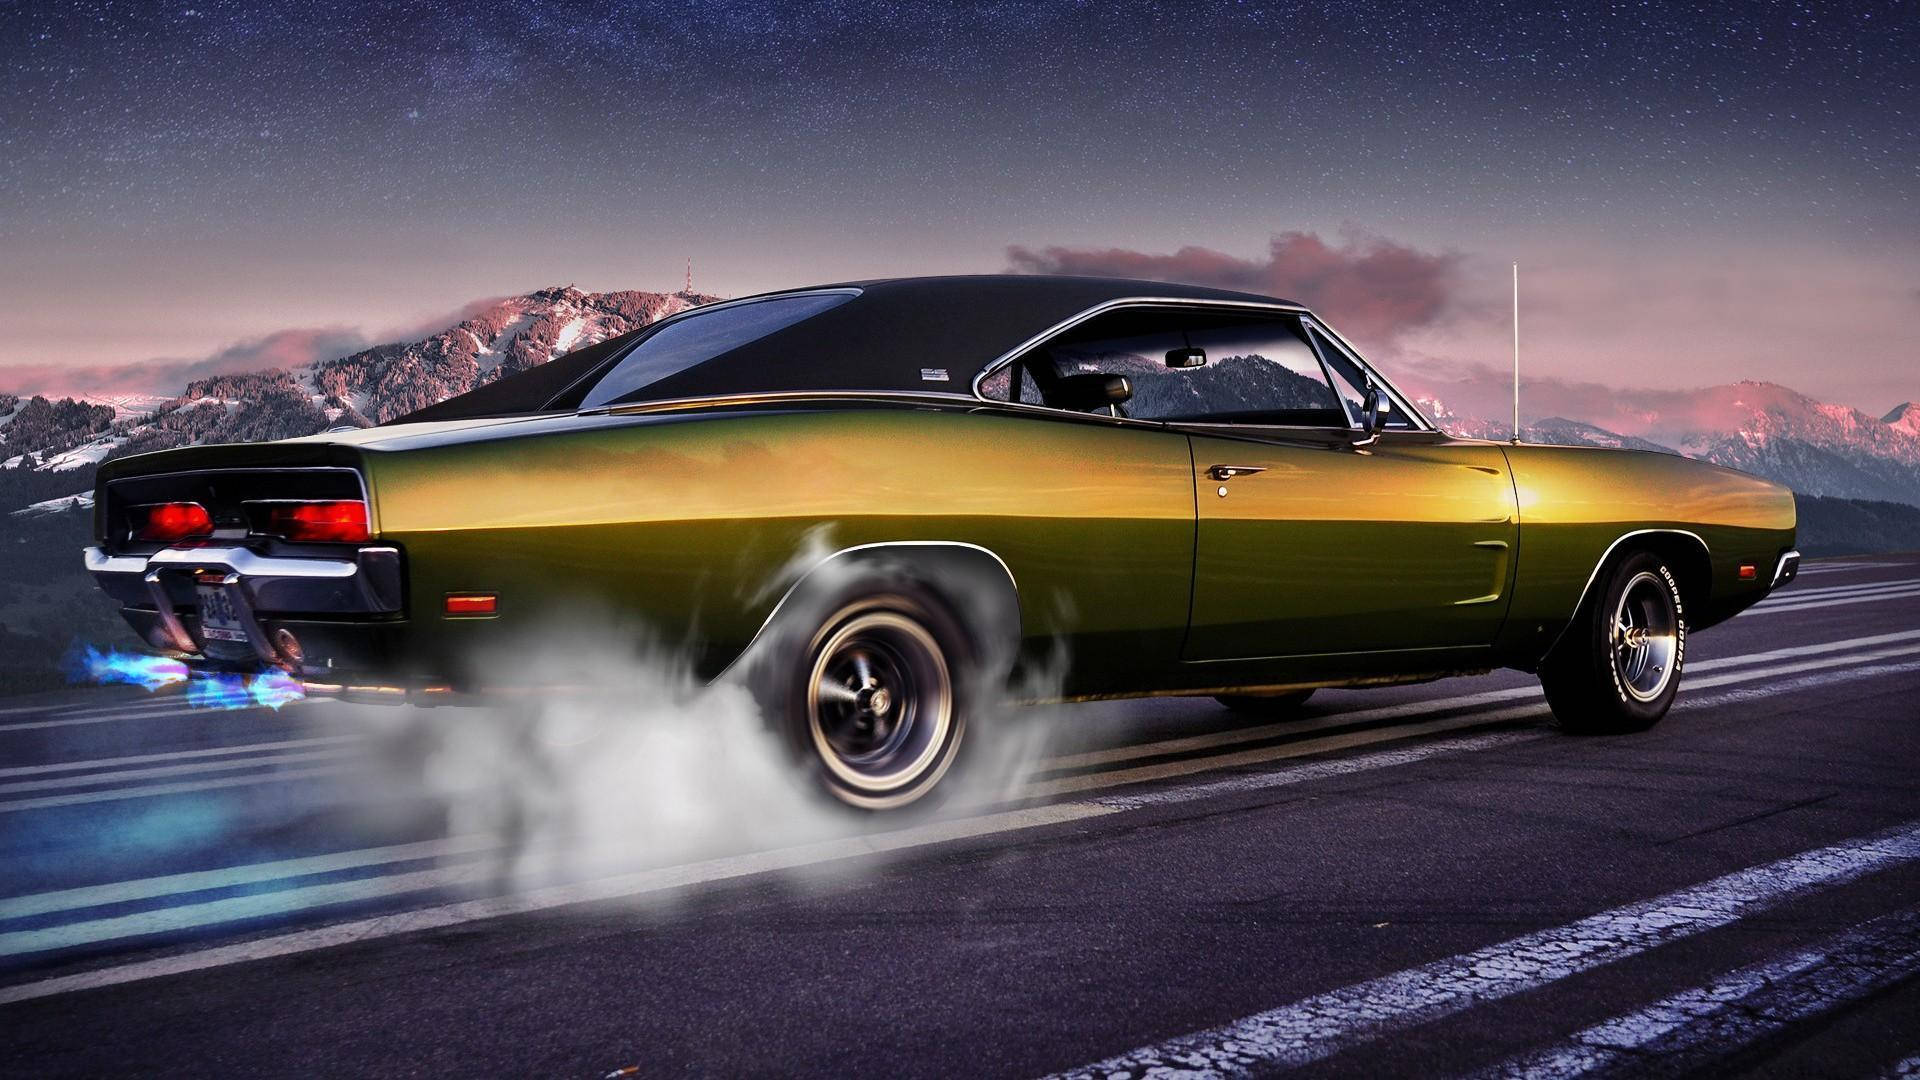 Gold Dodge Charger Muscle Car Wallpaper